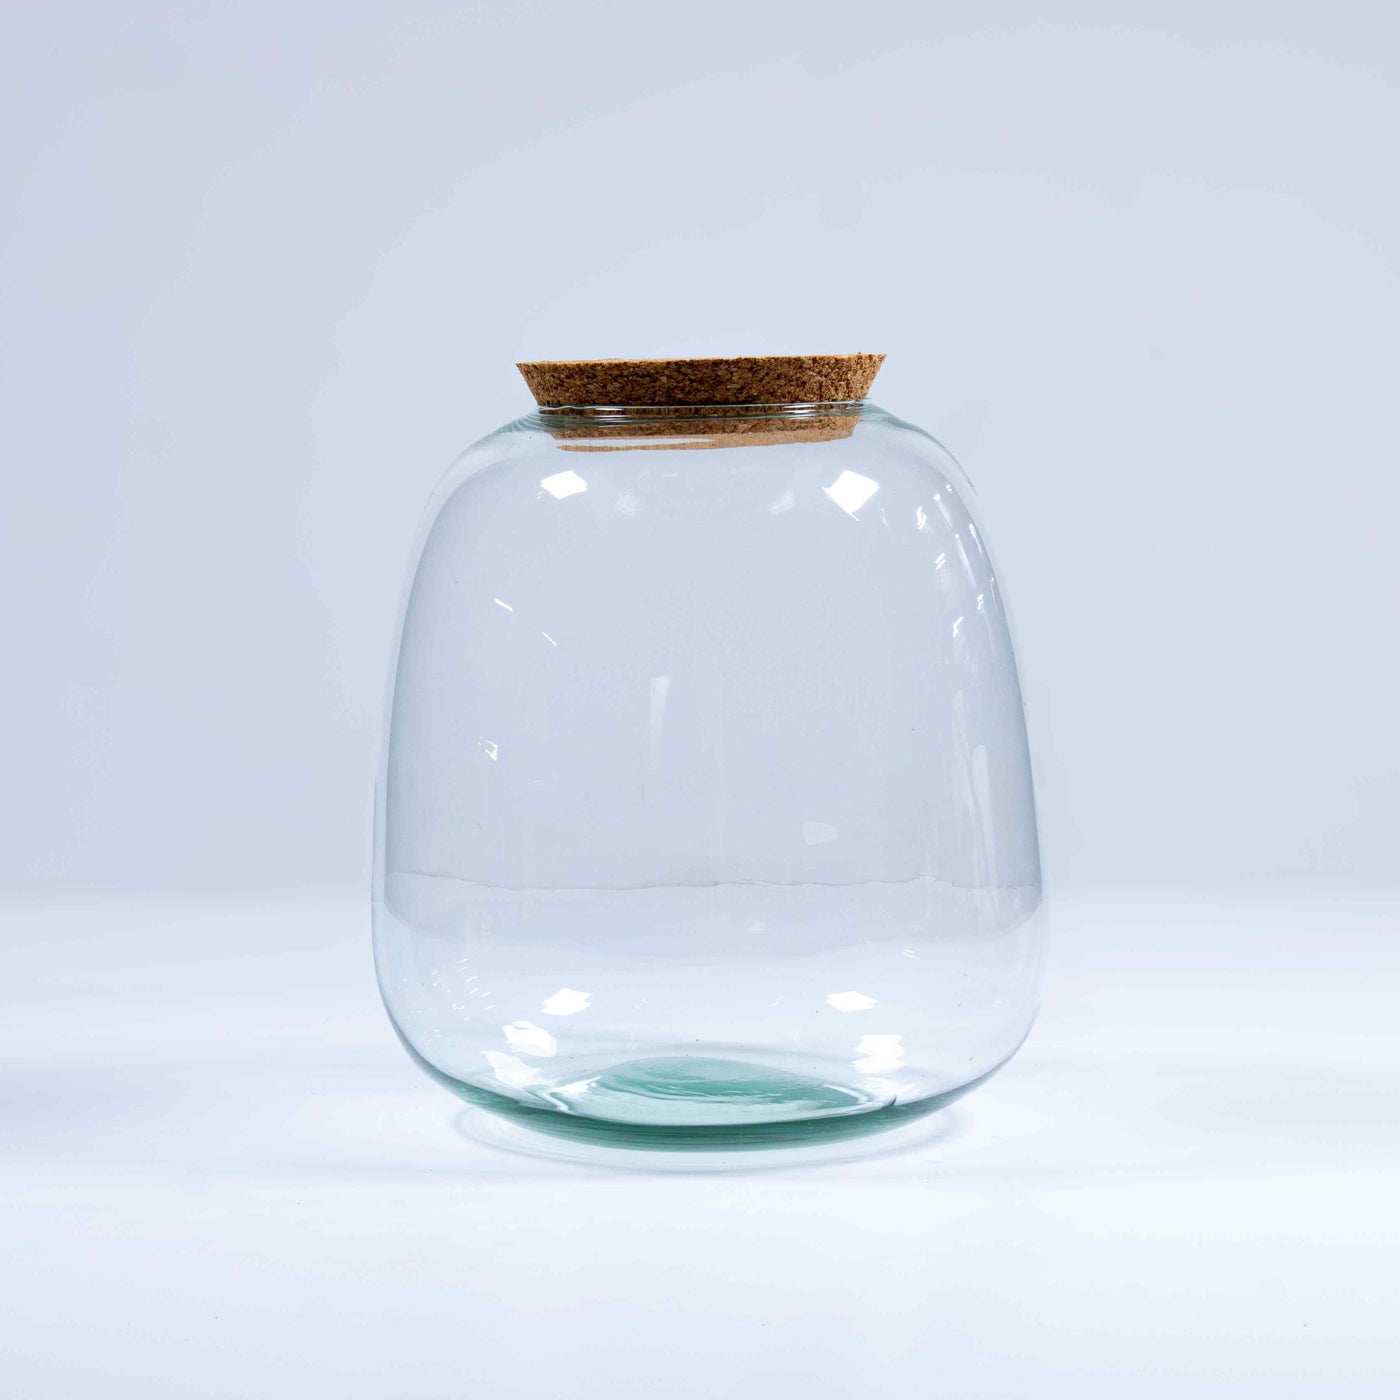 Bulb terrarium container with cork lid from ome